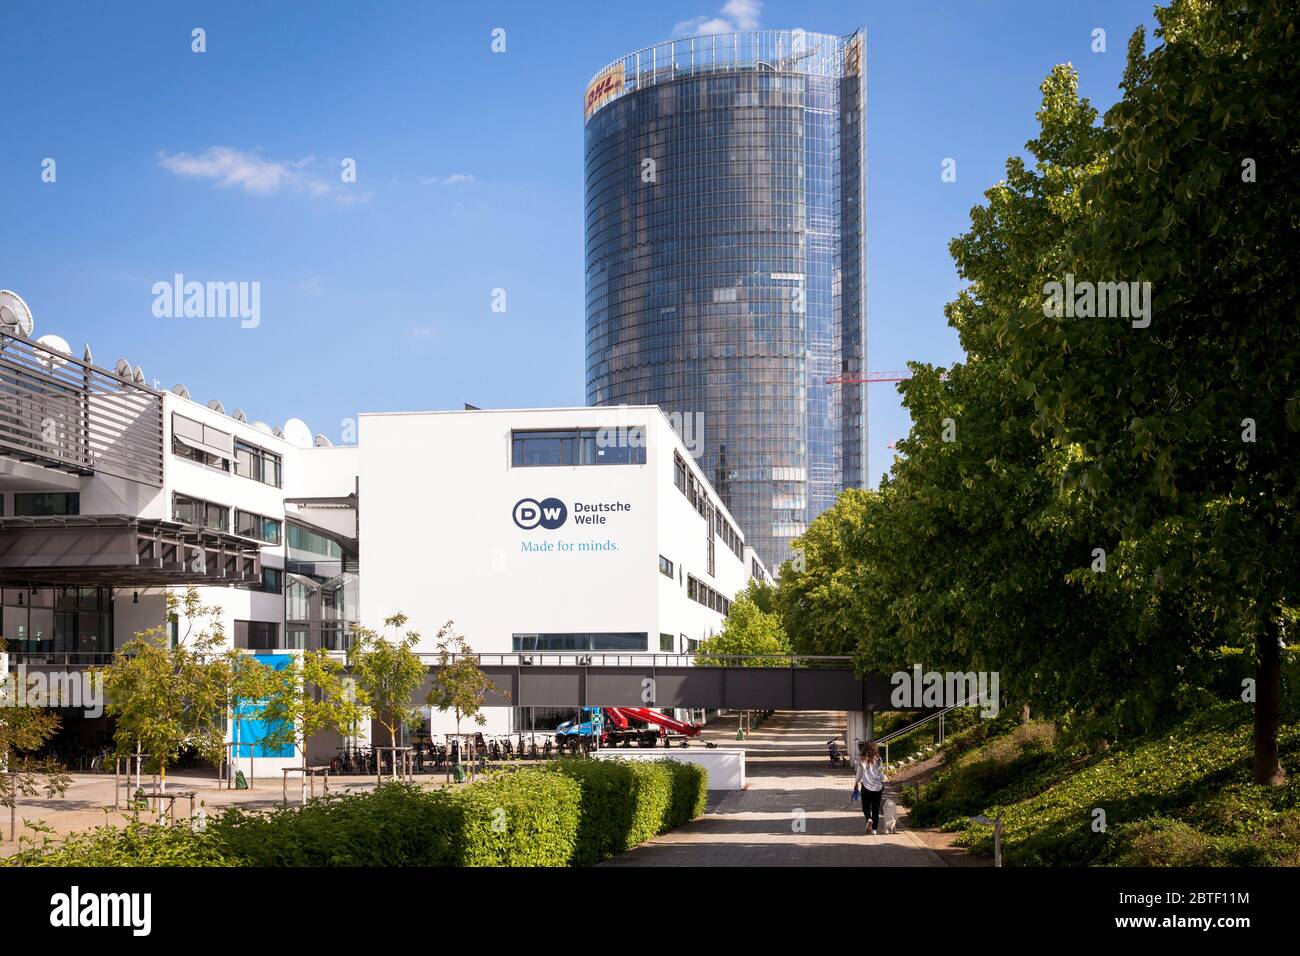 headquarters of the Deutsche Welle and the Post Tower, headquarters of the logistics company Deutsche Post DHL Group, Bonn, North Rhine-Westphalia, Ge Stock Photo